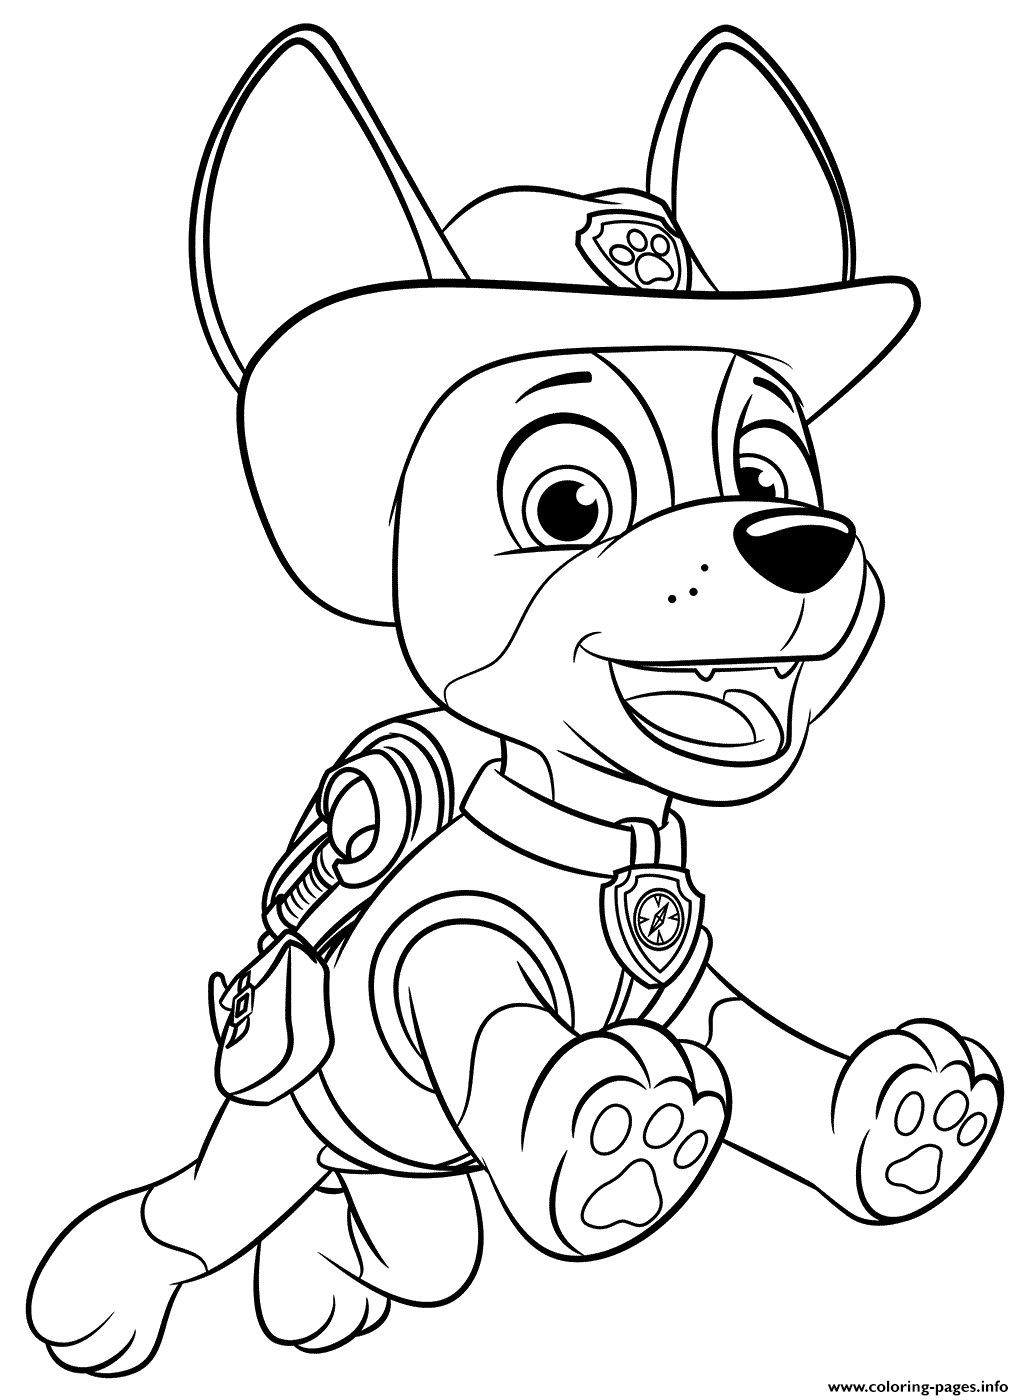 PAW Patrol Jungle Pup Tracker coloring